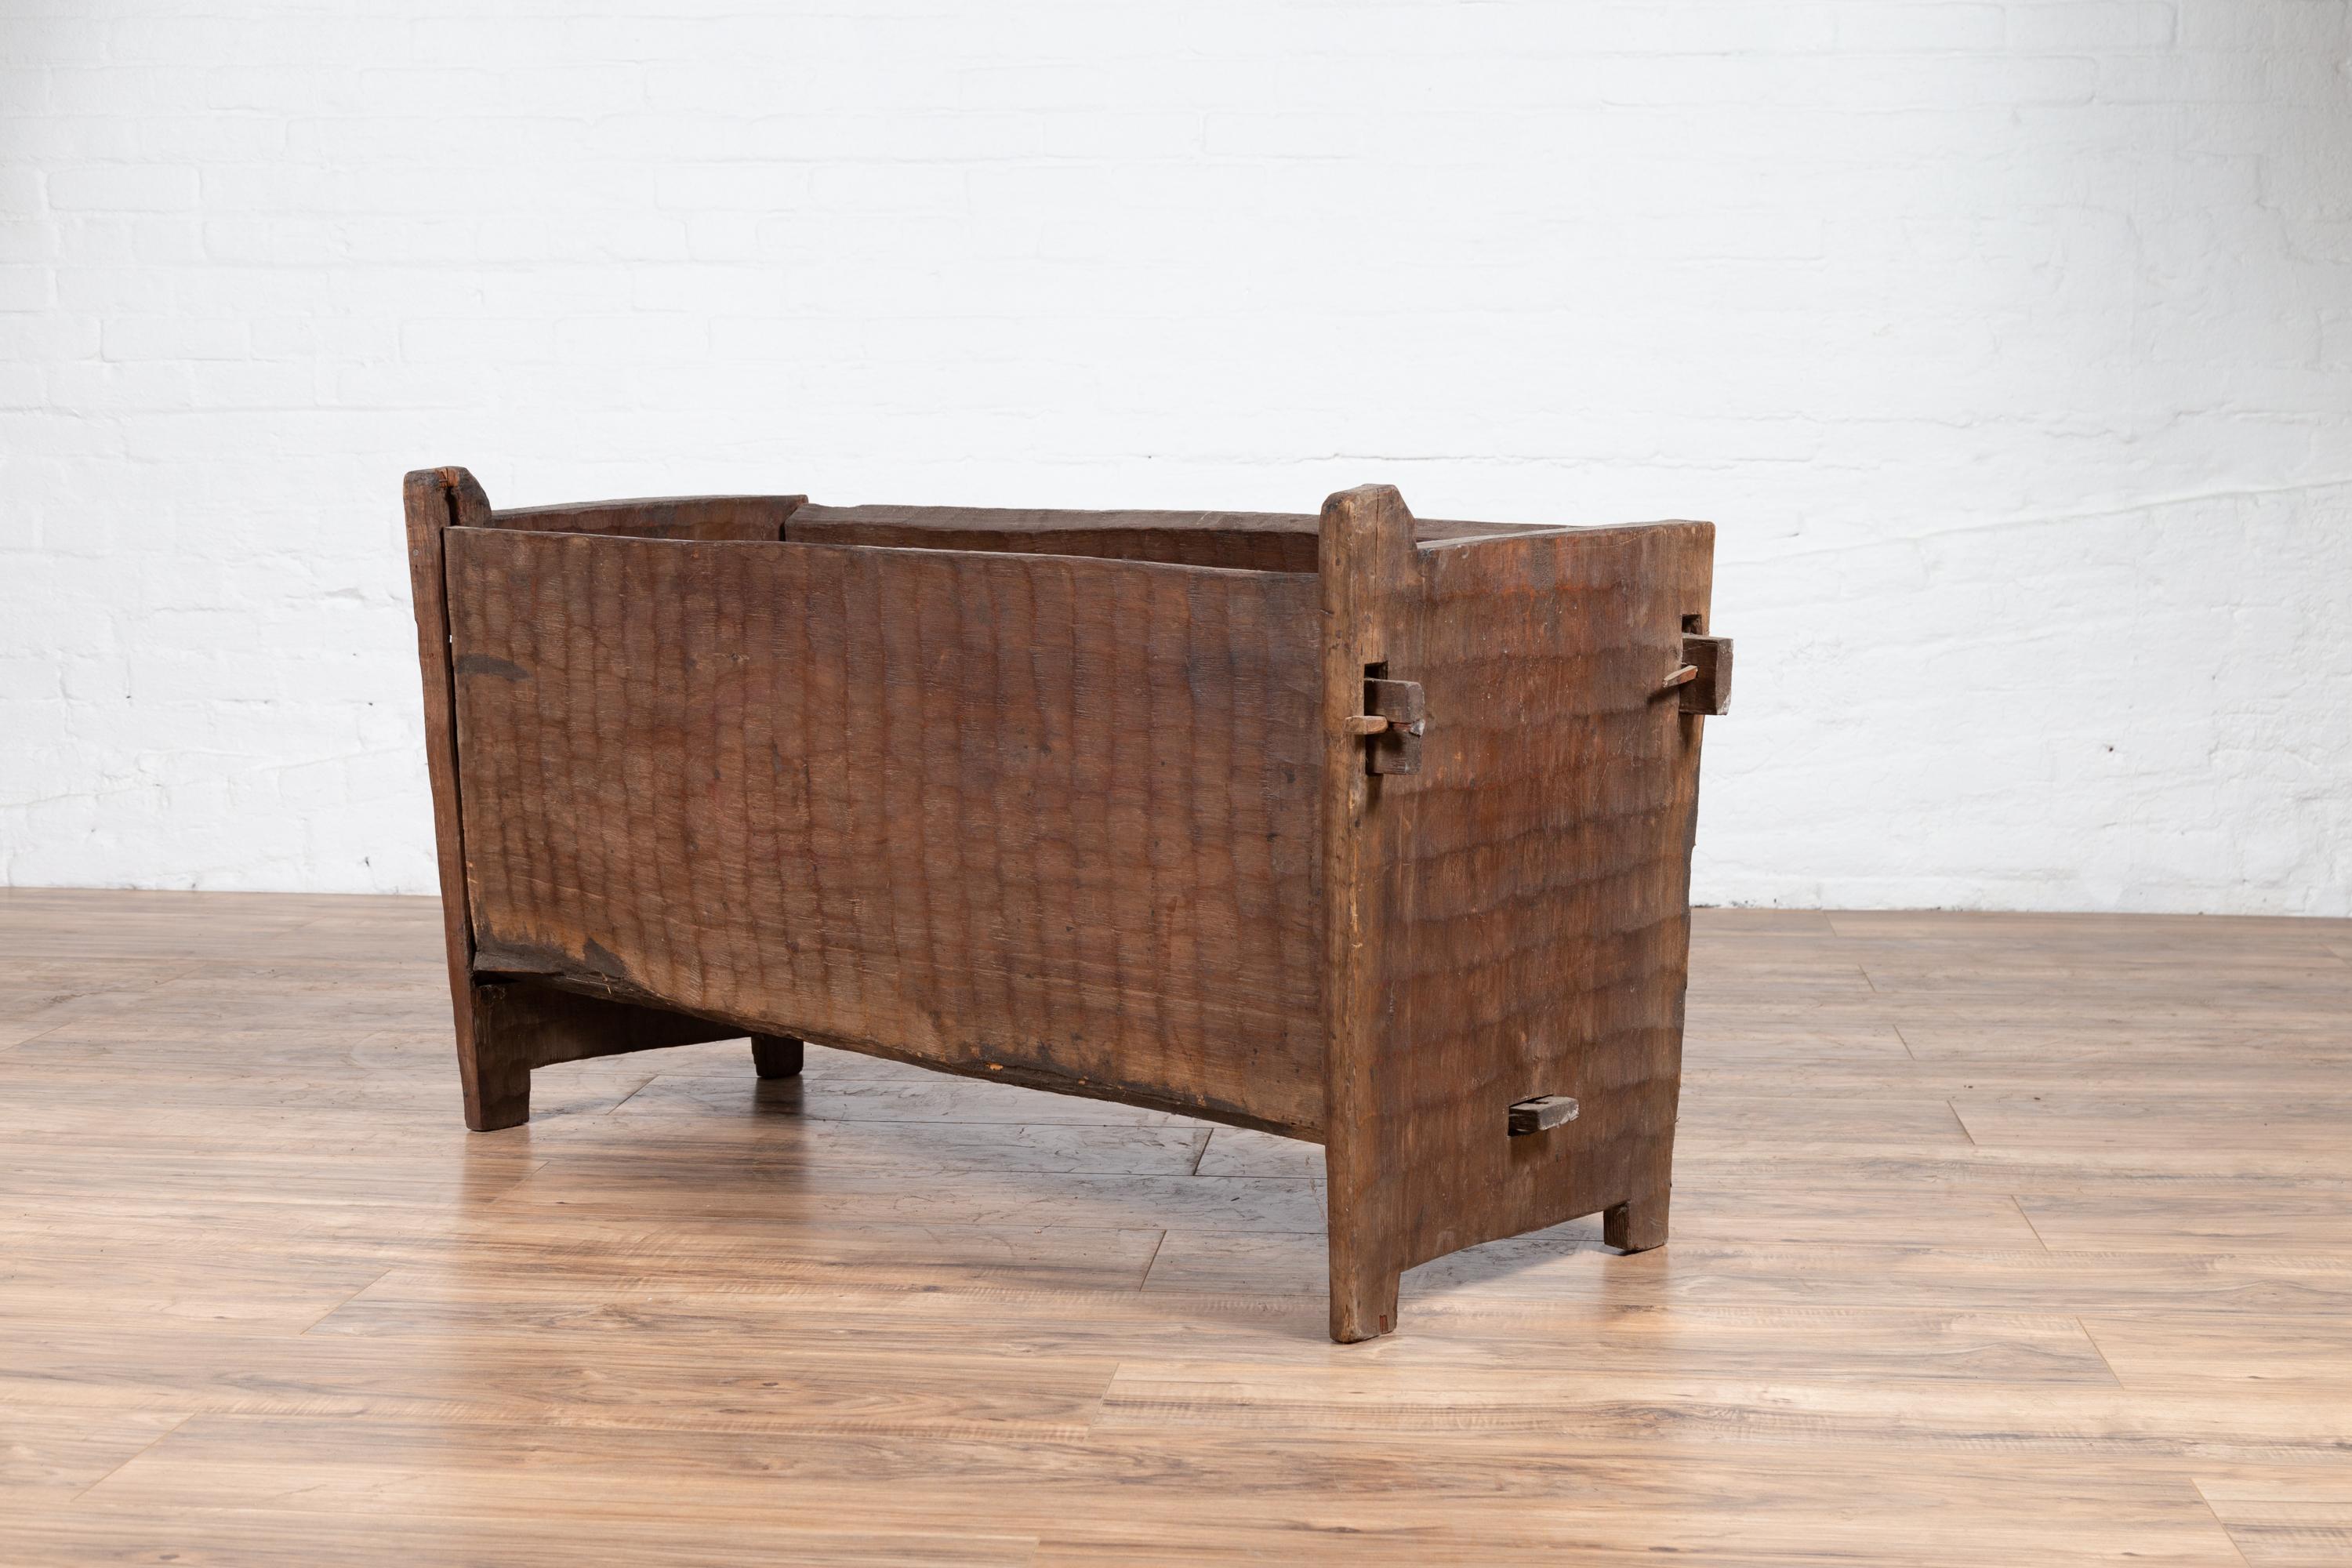 Antique Indian Rustic Wooden Planter Box with Weathered Patina and Chiseled Body For Sale 2